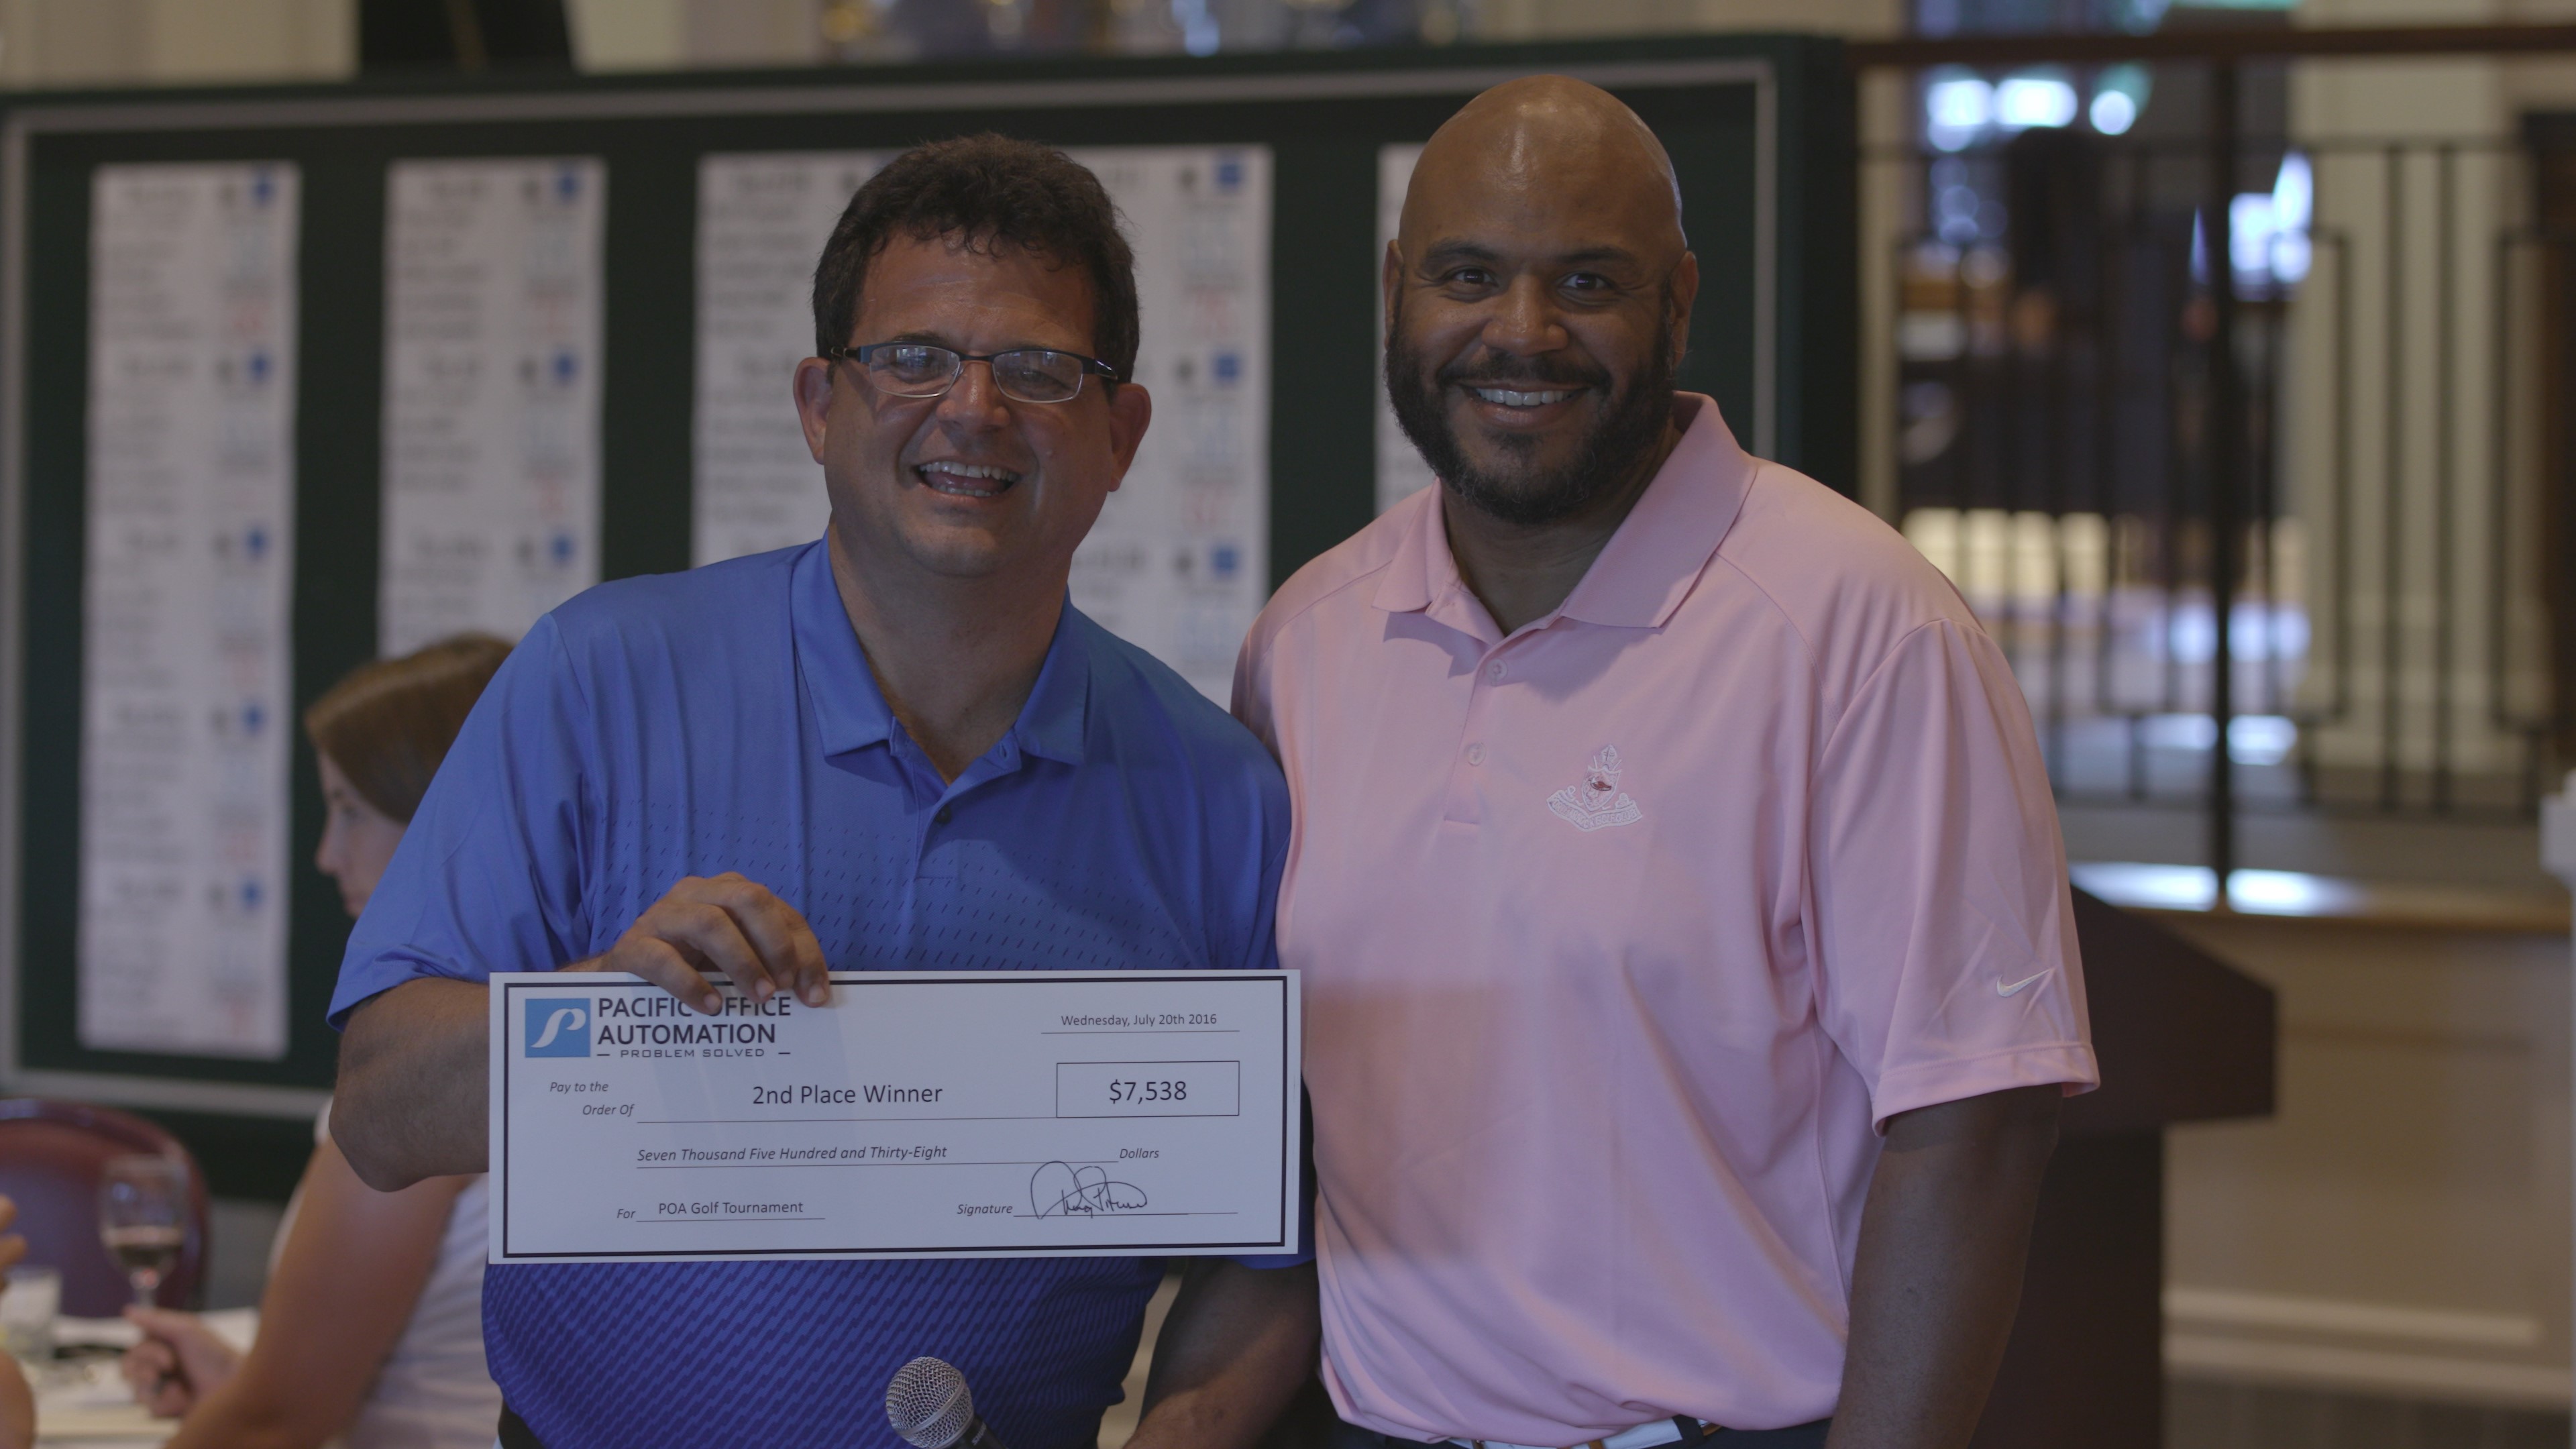 Representative from Boys & Girls Clubs of Portland receiving the 2nd place donation from Doug Pitassi, Pacific Office Automation president